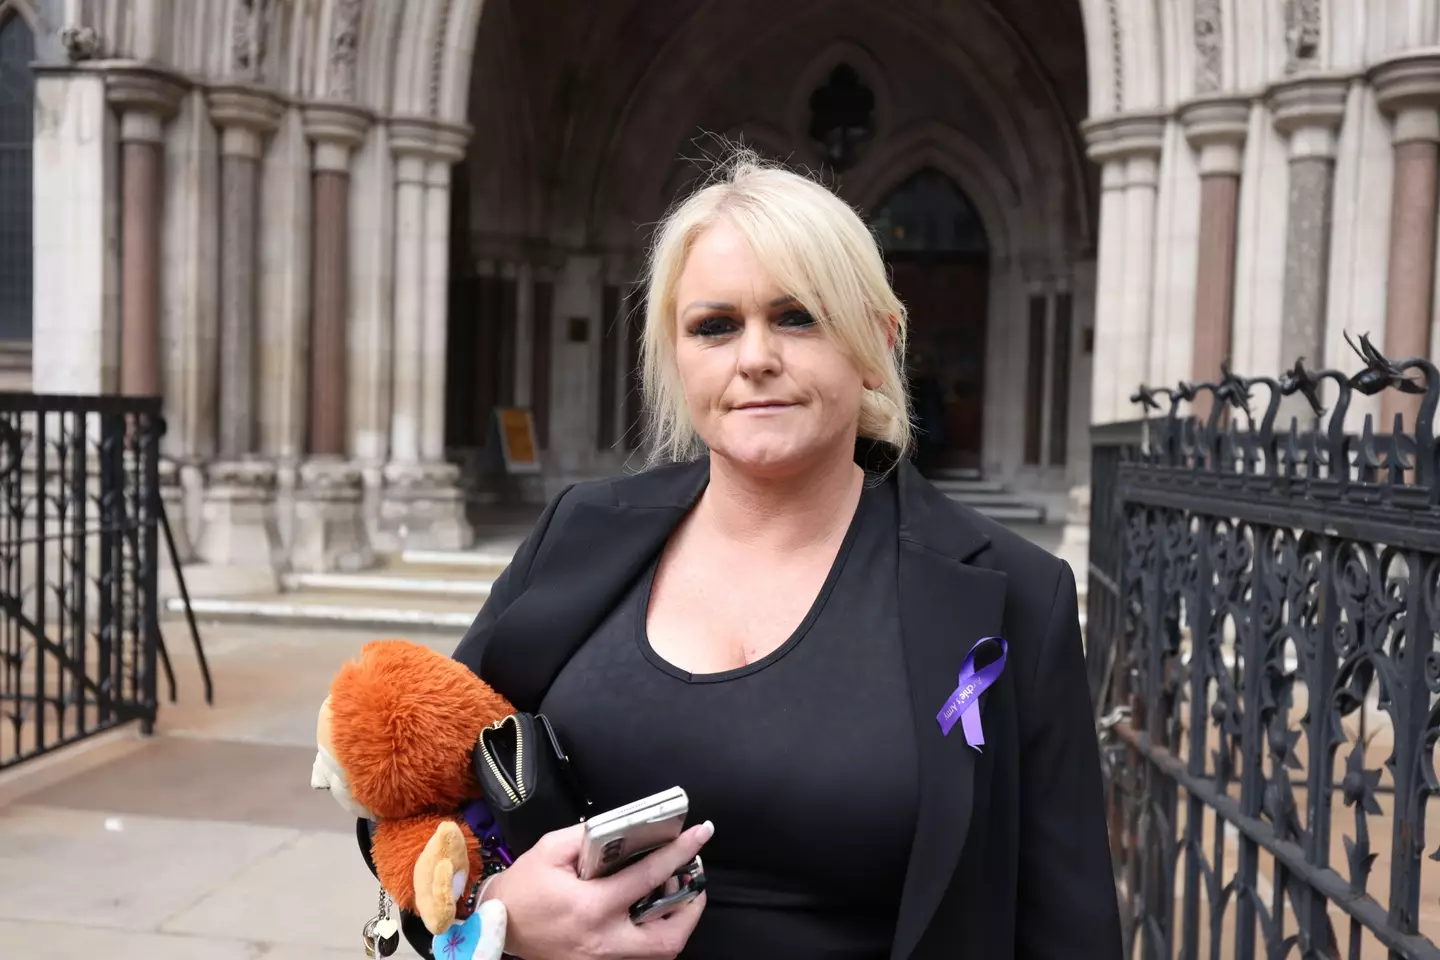 Hollie Dance has fought for her son's life in court.